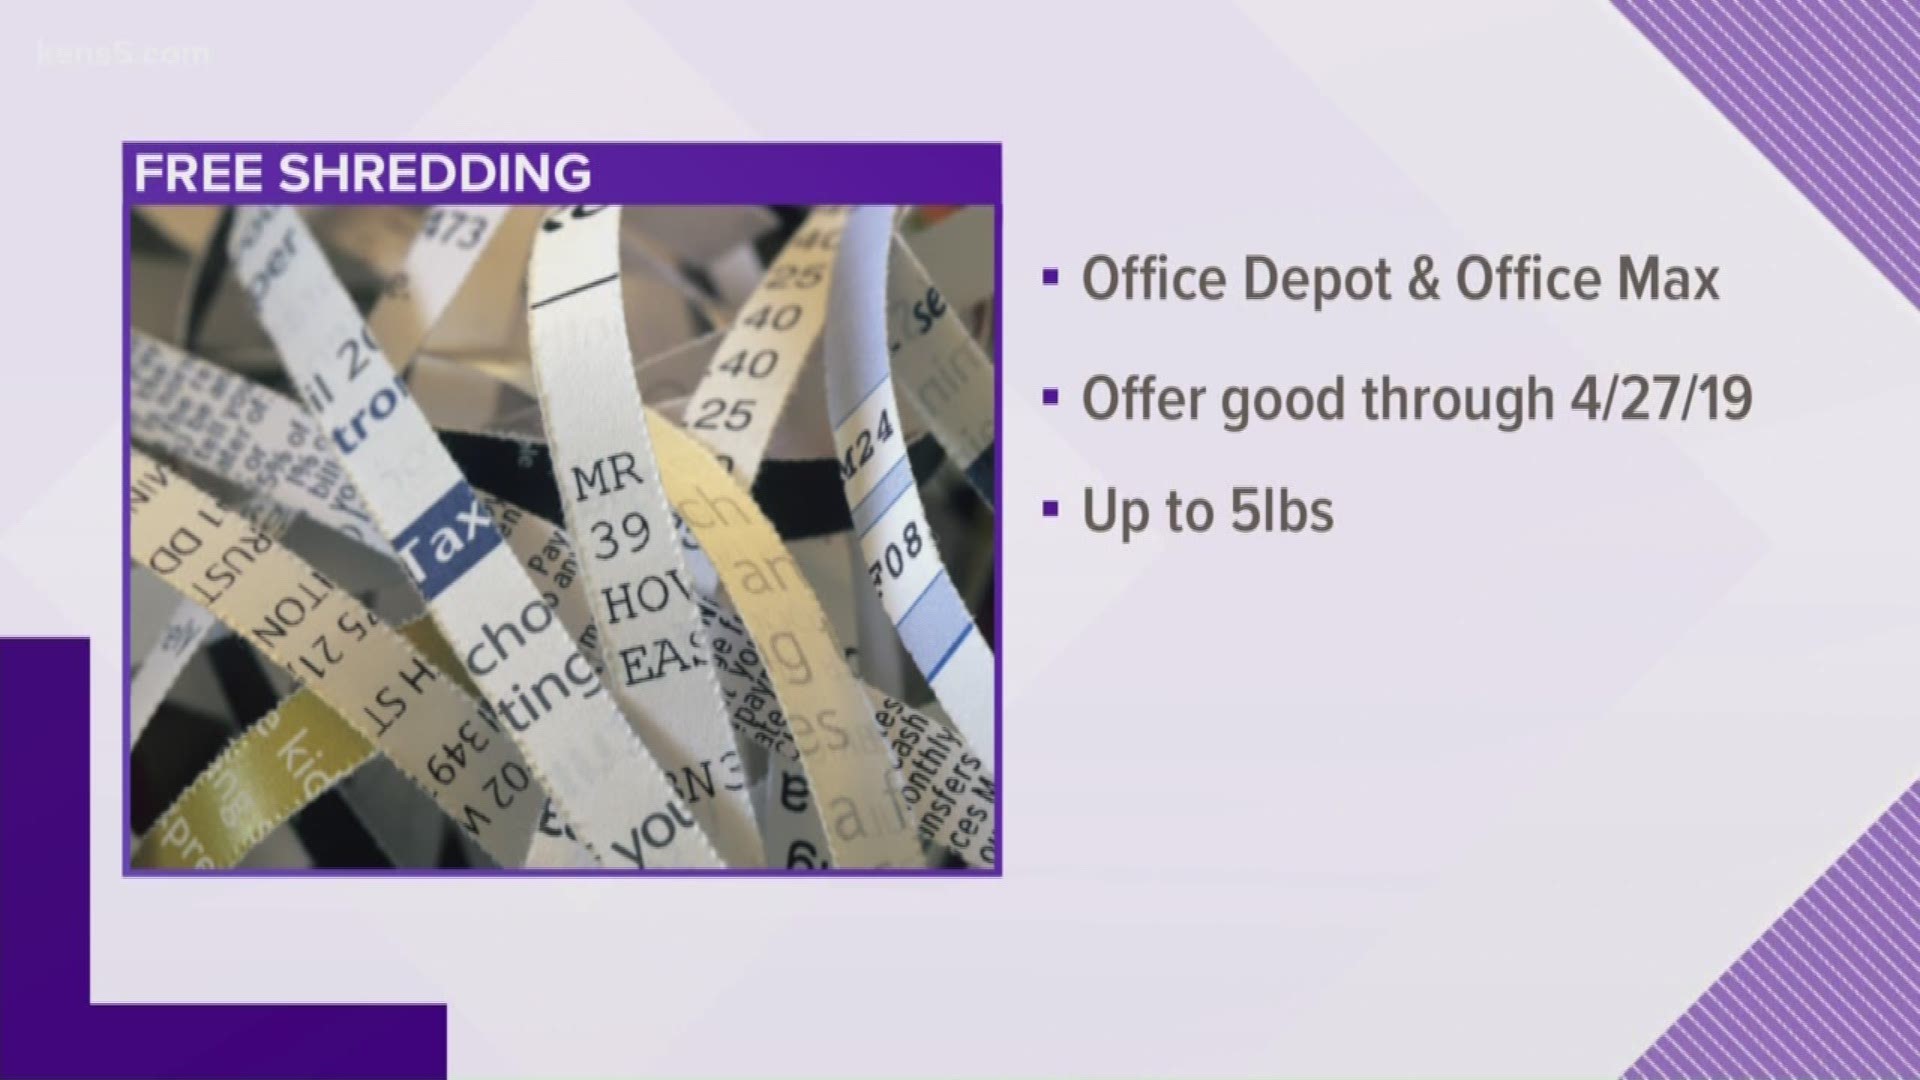 Workonomy is offering free shredding services through April 27, but customers will need the coupon to take advantage of the deal.